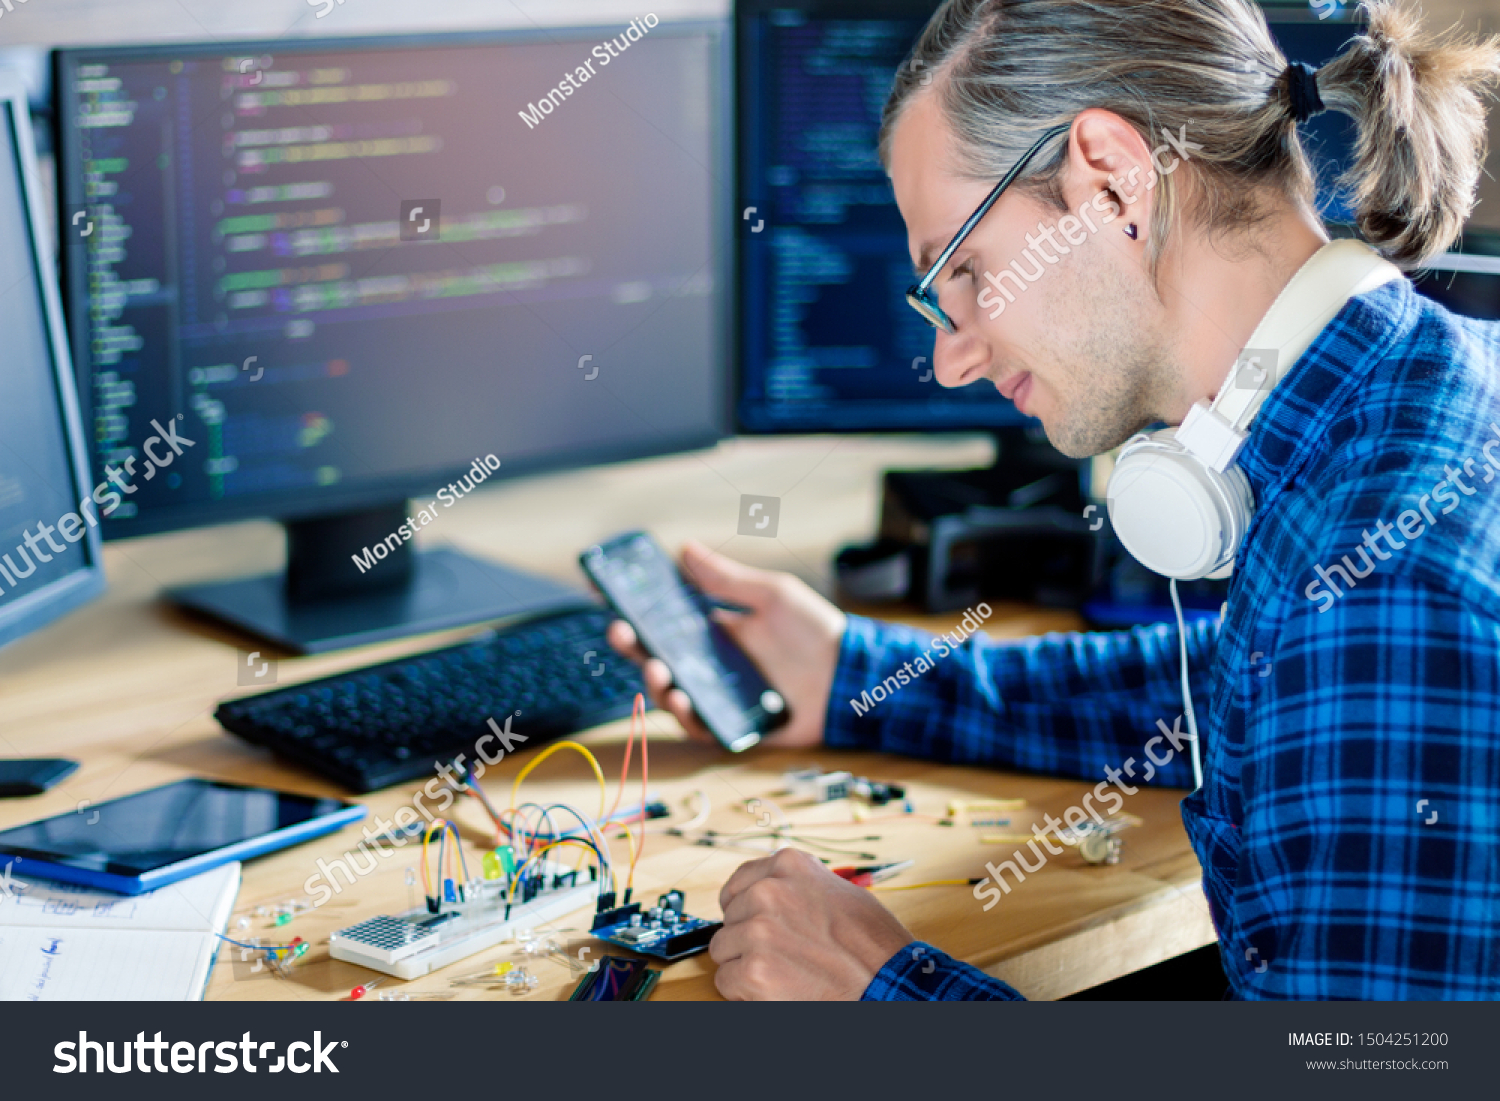 Developer is connecting breadboard to microcontroller. Man is holding smartphone with program code software for controlling electronic device. Chips, resistors, diodes on desktop of hardware engineer. #1504251200